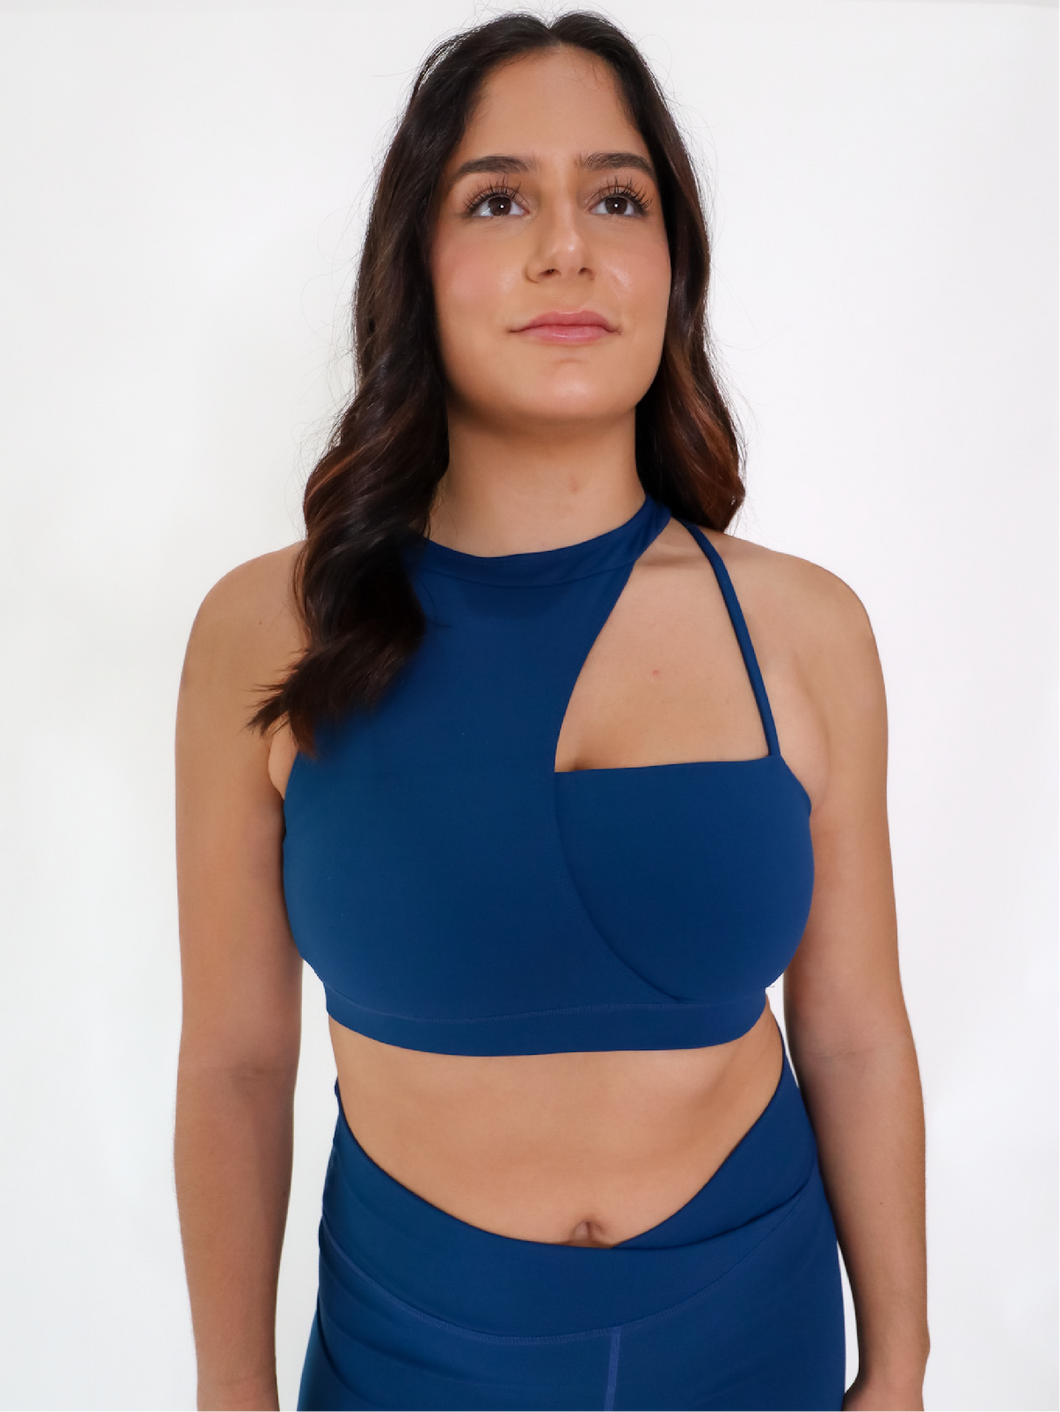 Blue Coffee Run Sports Bra provides a high neckline with ample support and comfort.